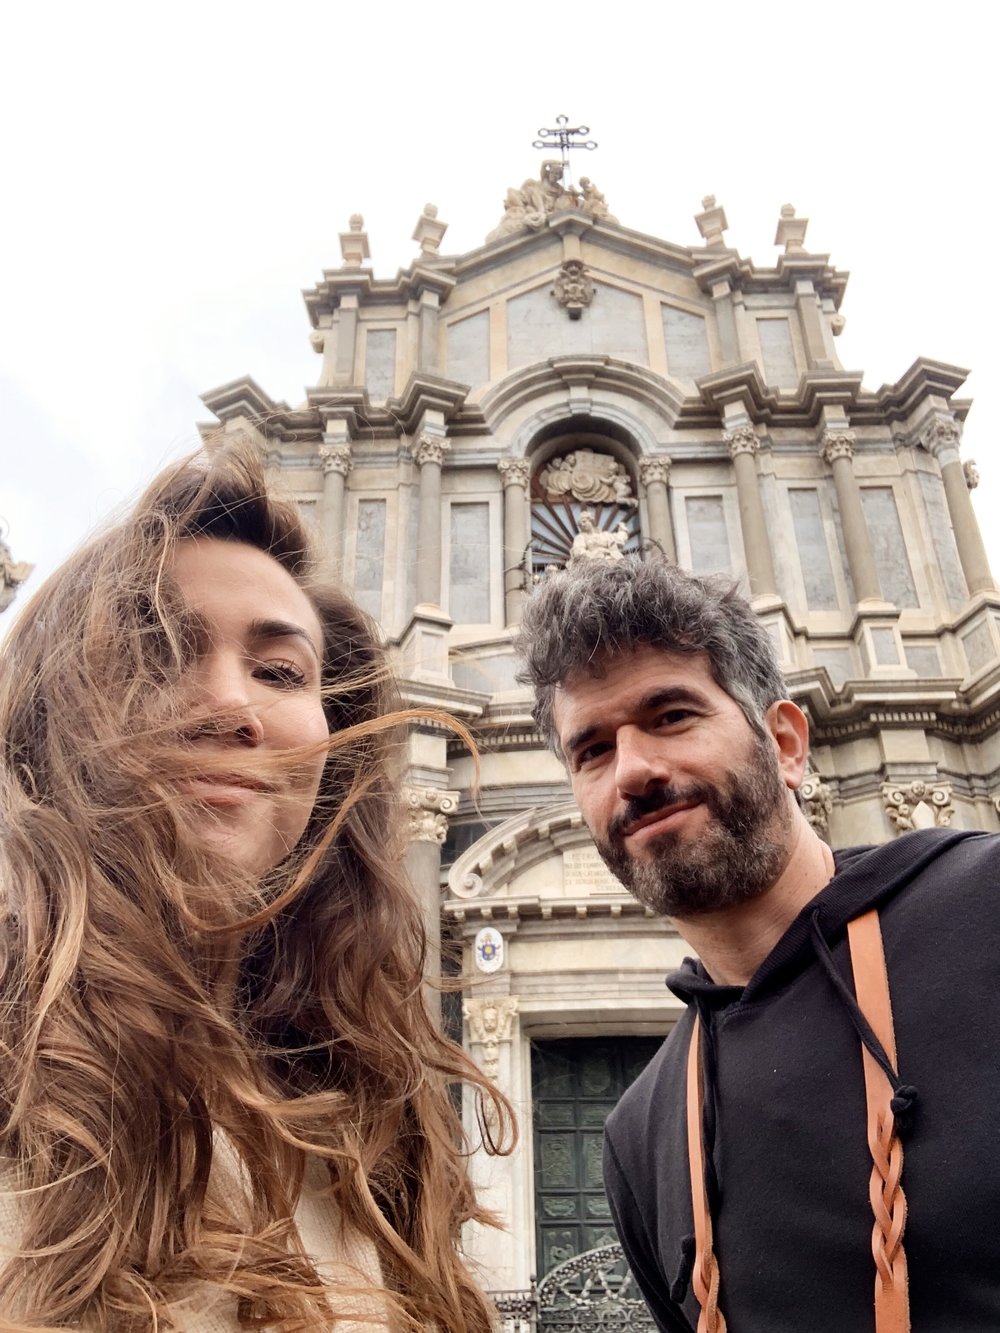  When the cathedral isn’t open yet… you take a selfie in front of it. :) 